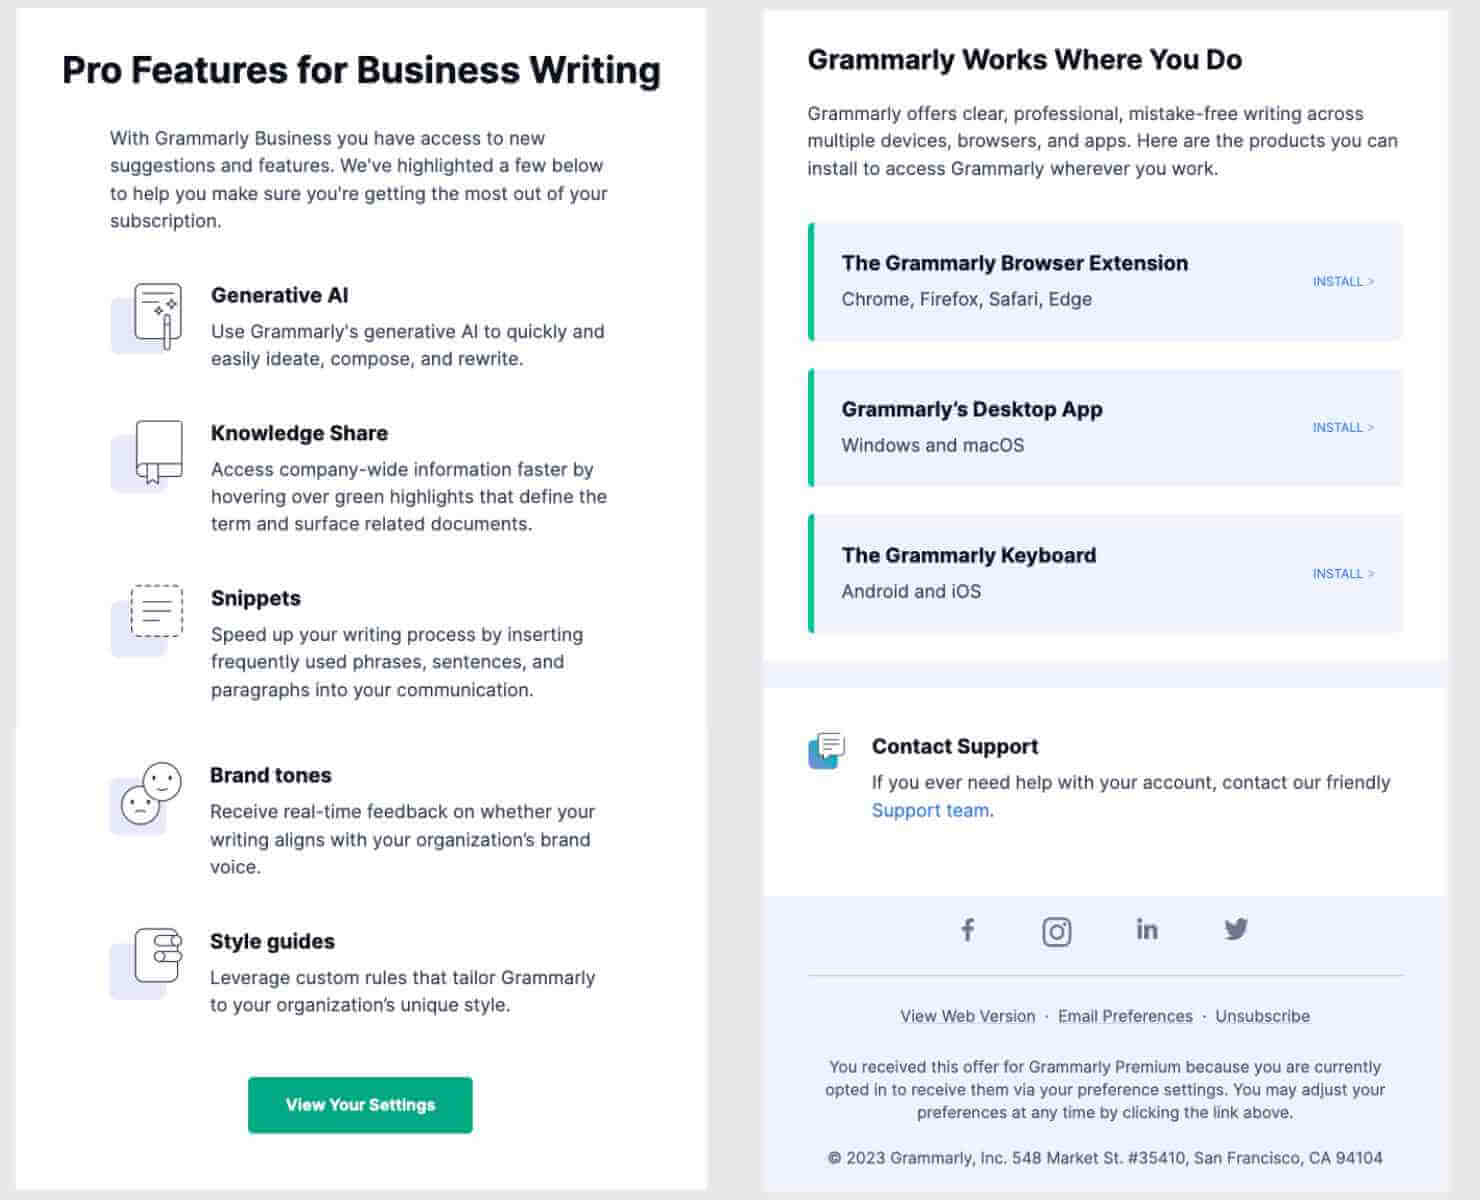 Pro Features for Business Writing With Grammarly Business you have access to new suggestions and features. We've highlighted a few below to help you make sure you're getting the most out of your subscription. Generative Al: Use Grammarly's generative Al to quickly and easily ideate, compose, and rewrite. Knowledge Share: Access company-wide information faster by hovering over green highlights that define the term and surface related documents. Snippets: Speed up your writing process by inserting frequently used phrases, sentences, and paragraphs into your communication. A0 Brand tones: Receive real-time feedback on whether your writing aligns with your organization's brand voice. Style guides: Leverage custom rules that tailor Grammarly to your organization's unique style. Grammarly Works Where You Do Grammarly offers clear, professional, mistake-free writing across multiple devices, browsers, and apps. Here are the products you can install to access Grammarly wherever you work. The Grammarly Browser Extension Chrome, Firefox, Safari, Edge INSTALL Grammarly's Desktop App Windows and macOS INSTALL The Grammarly Keyboard Android and iOS INSTALL. Contact Support If you ever need help with your account, contact our friendly Support team.